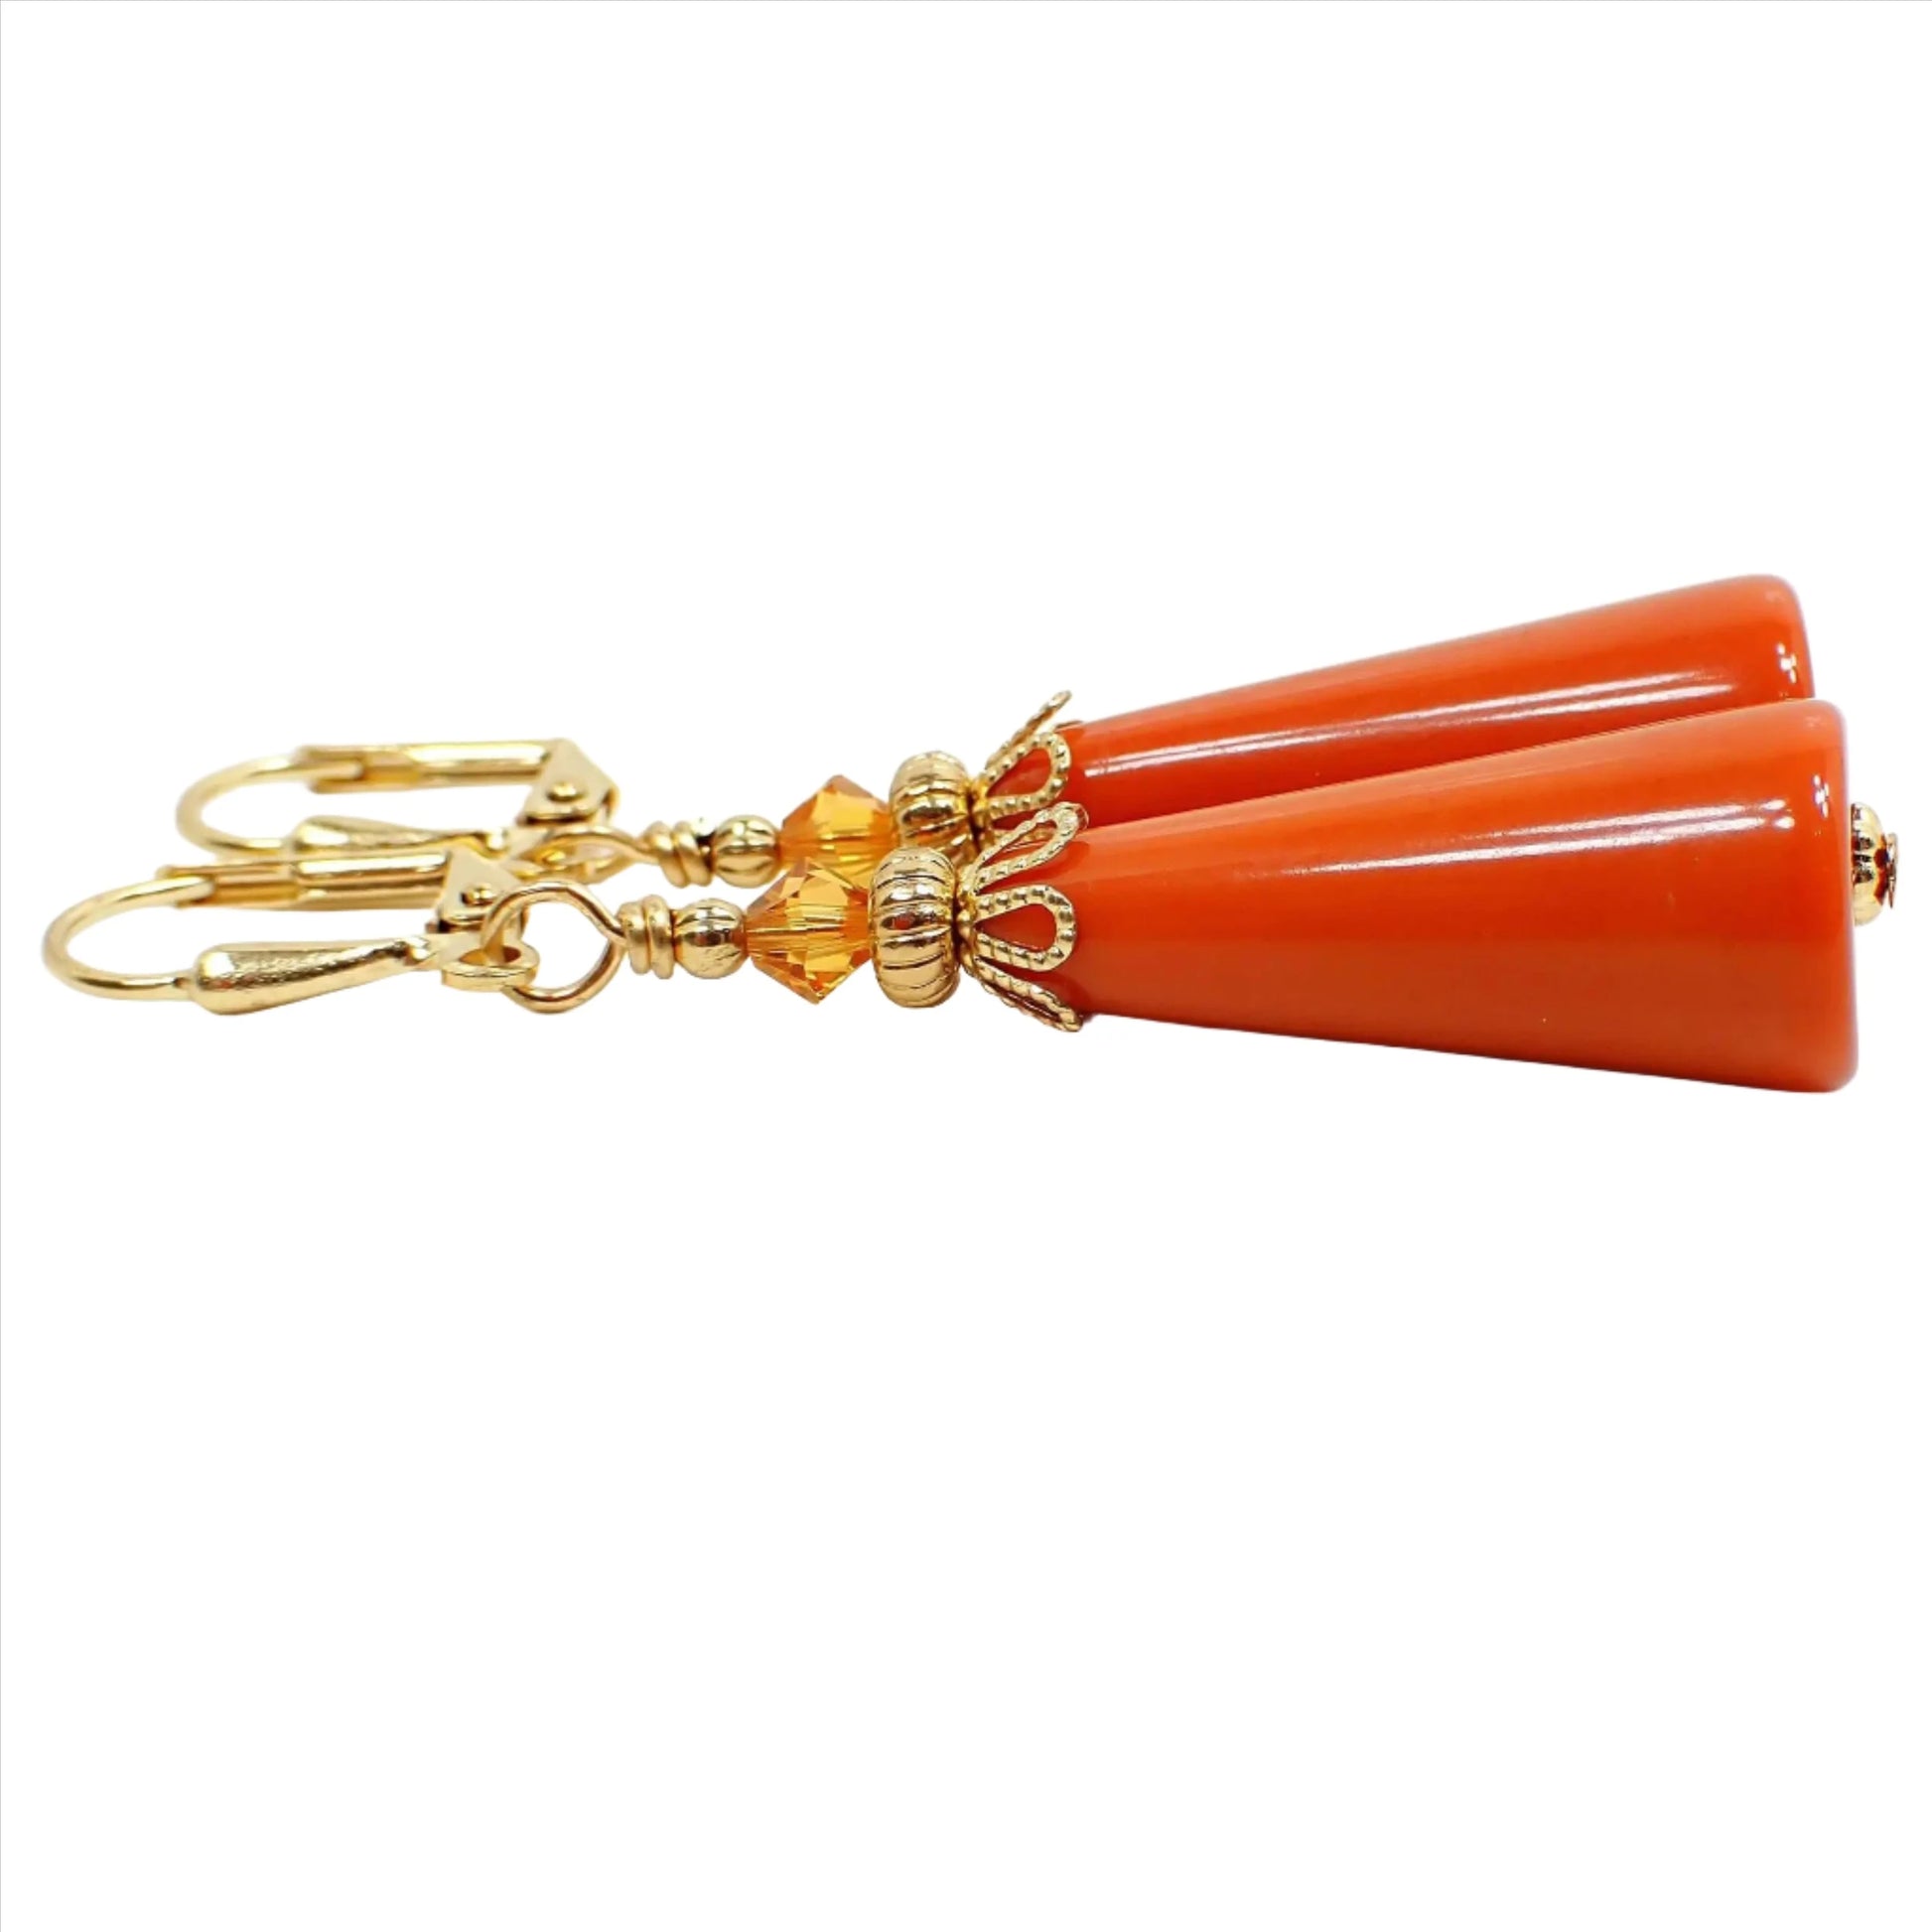 Side view of the handmade geometric cone earrings. The metal is gold plated in color. There are bright orange faceted glass crystal beads on the top. The bottom cone shaped bead is a vintage lucite bead in a dark burnt orange color.